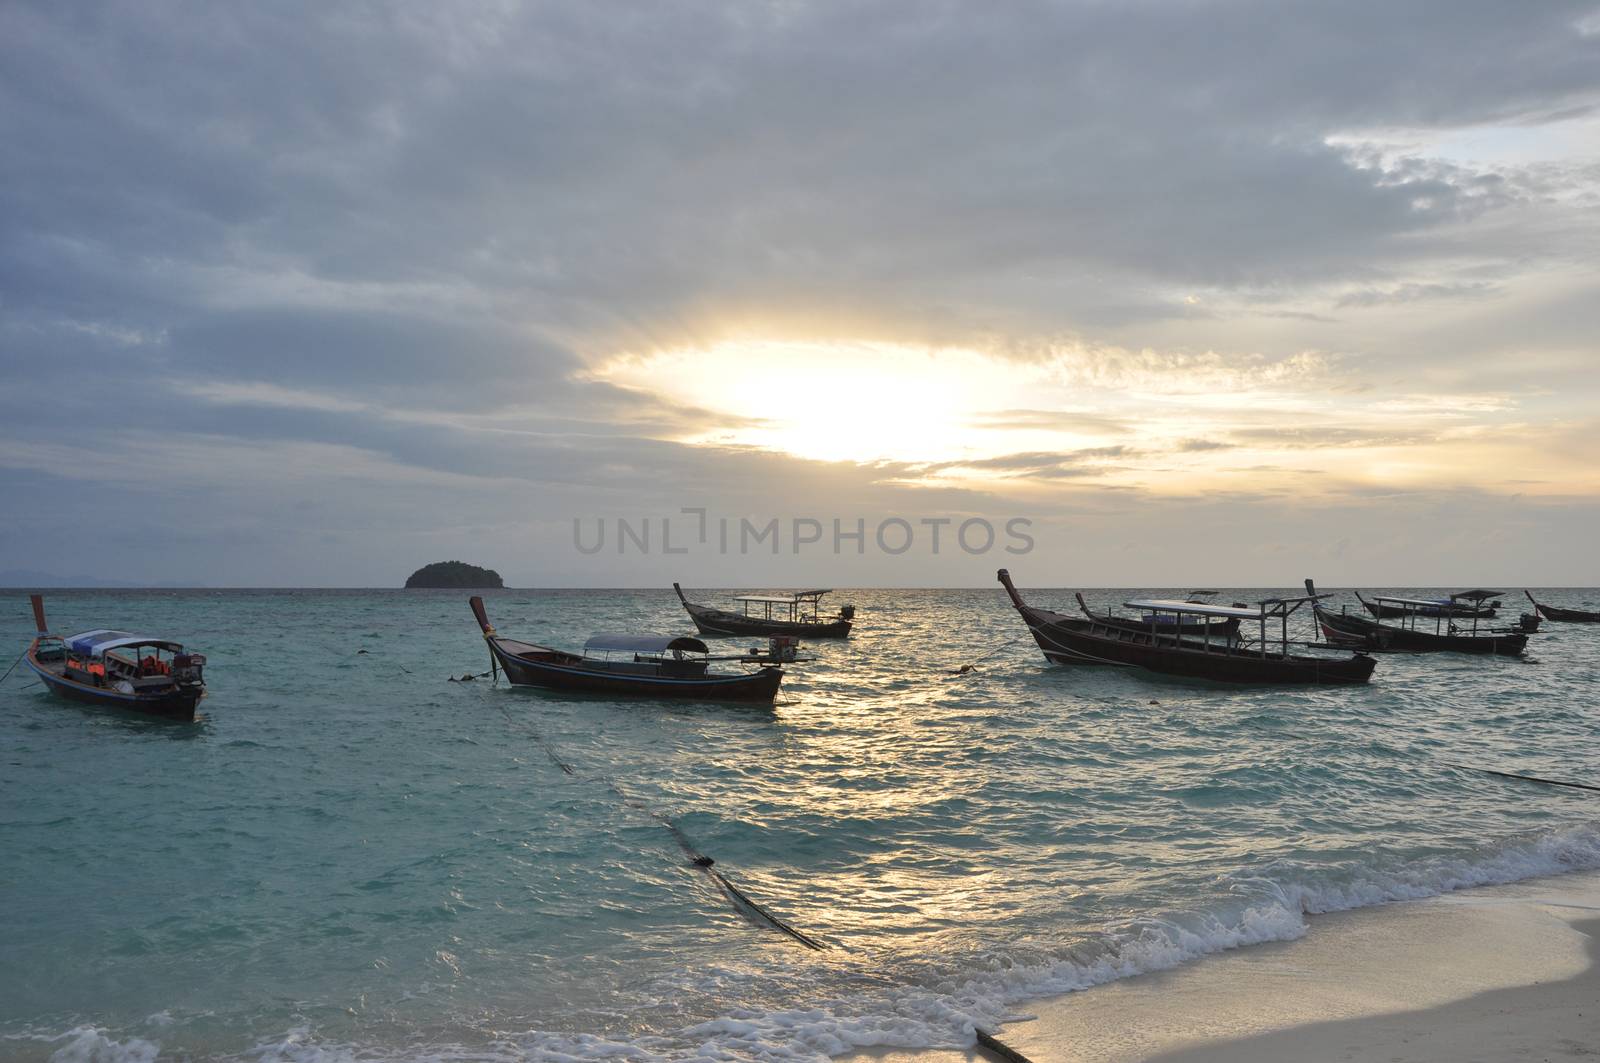 Boat in the sea with sunrise and island background